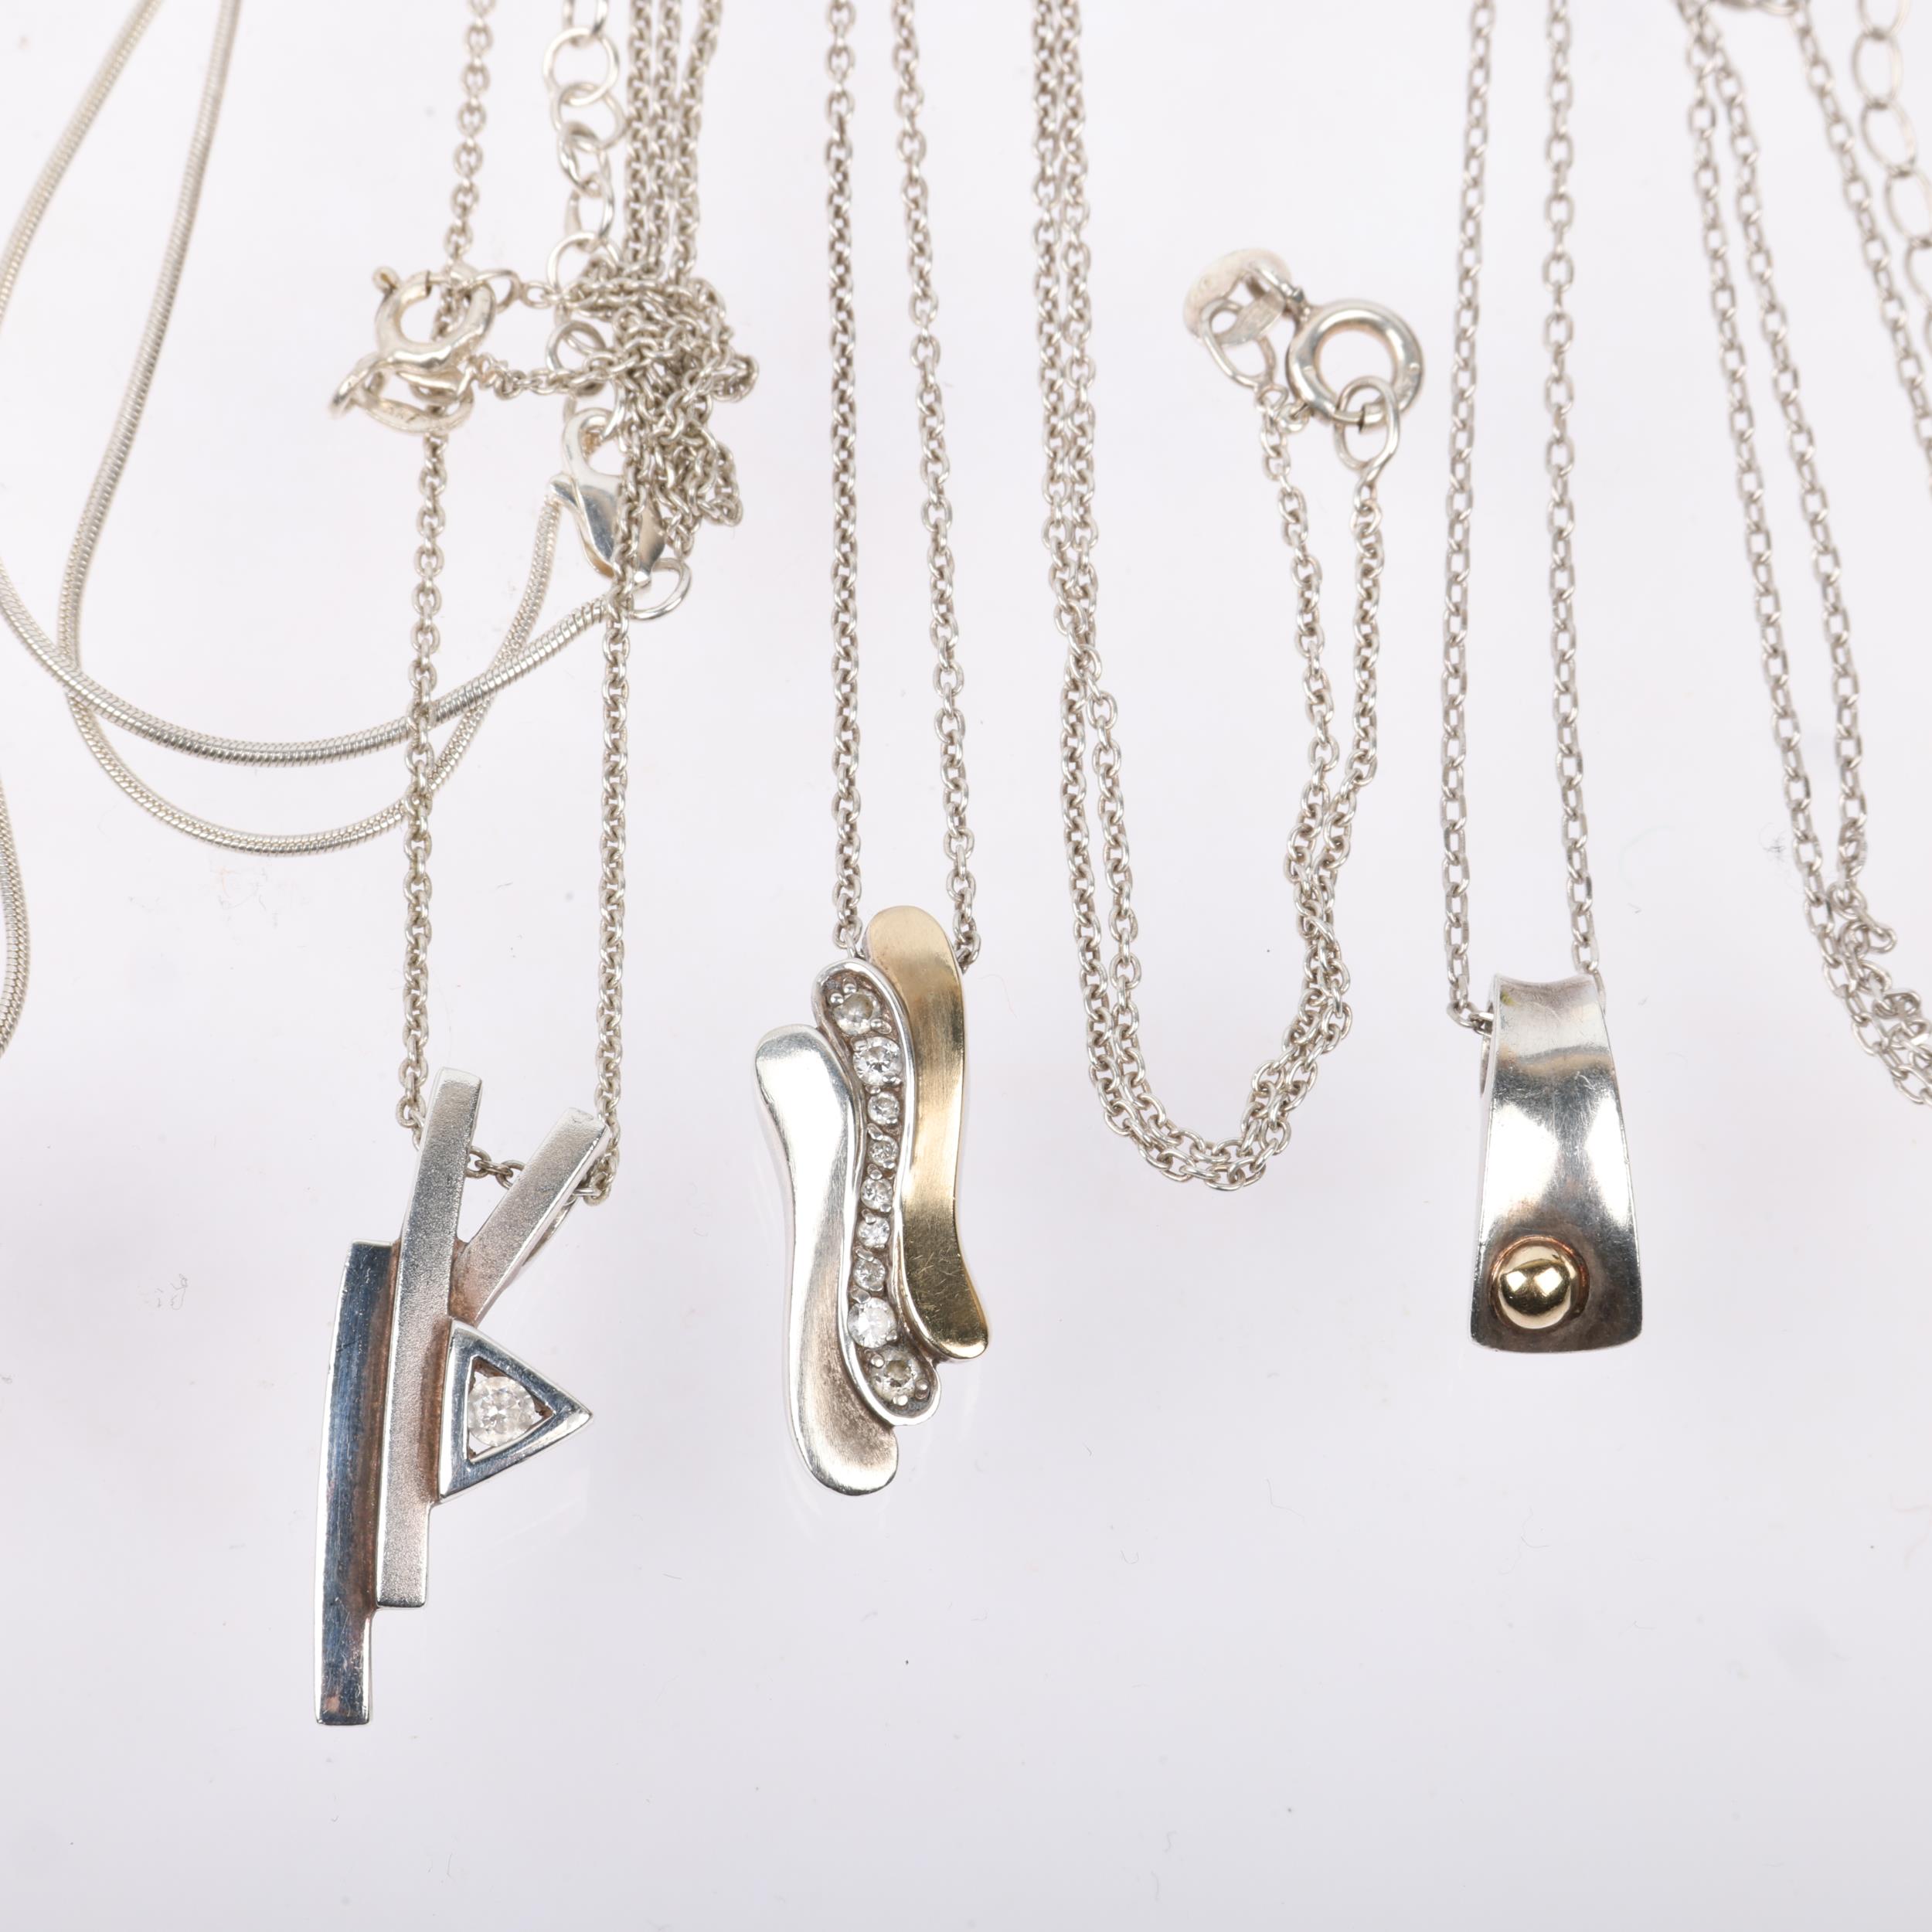 5 Danish silver pendant necklaces, makers include Scrouples, largest pendant 26.4mm, 25.9g total (5) - Image 2 of 3